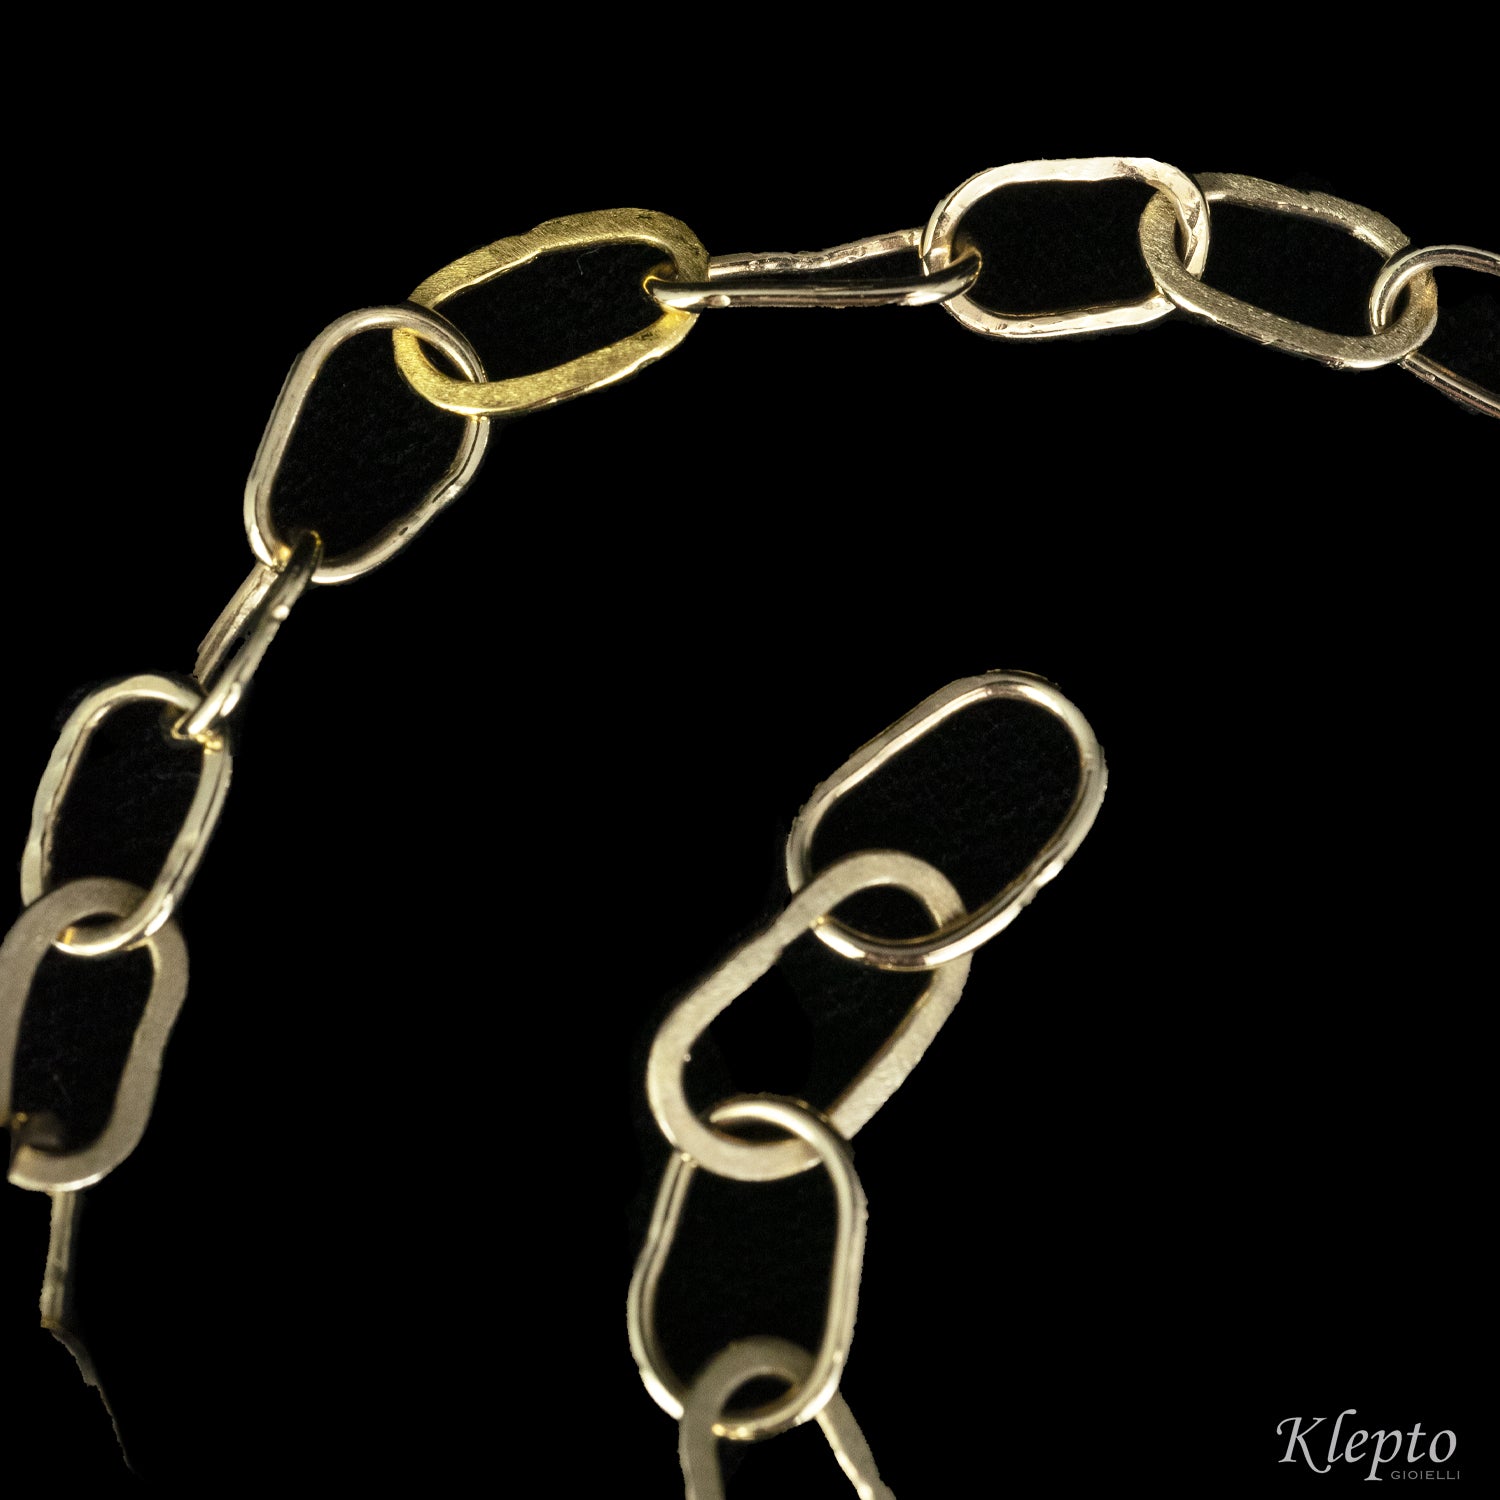 White gold bracelet with yellow gold details